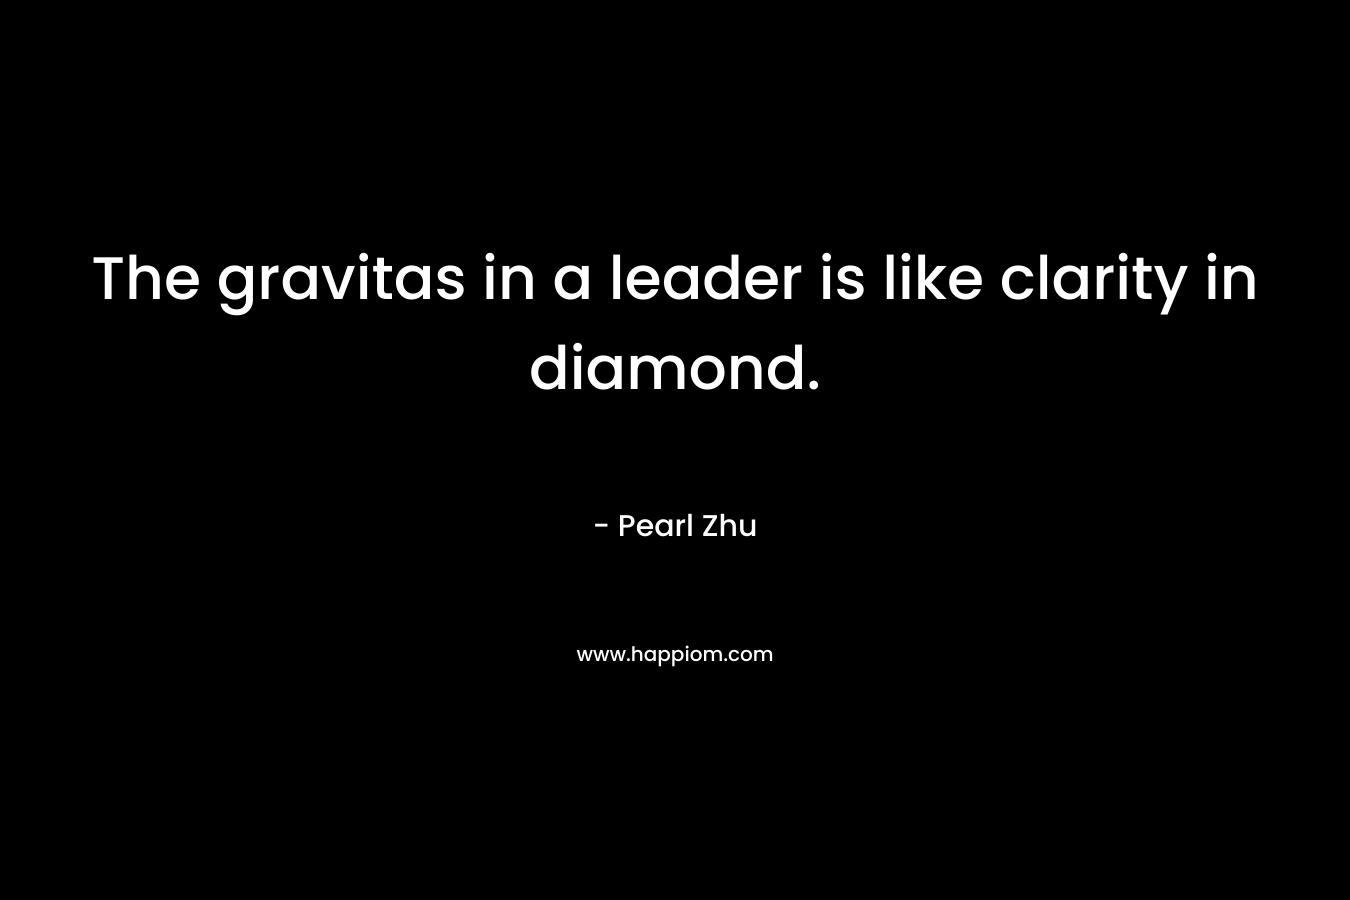 The gravitas in a leader is like clarity in diamond. – Pearl Zhu